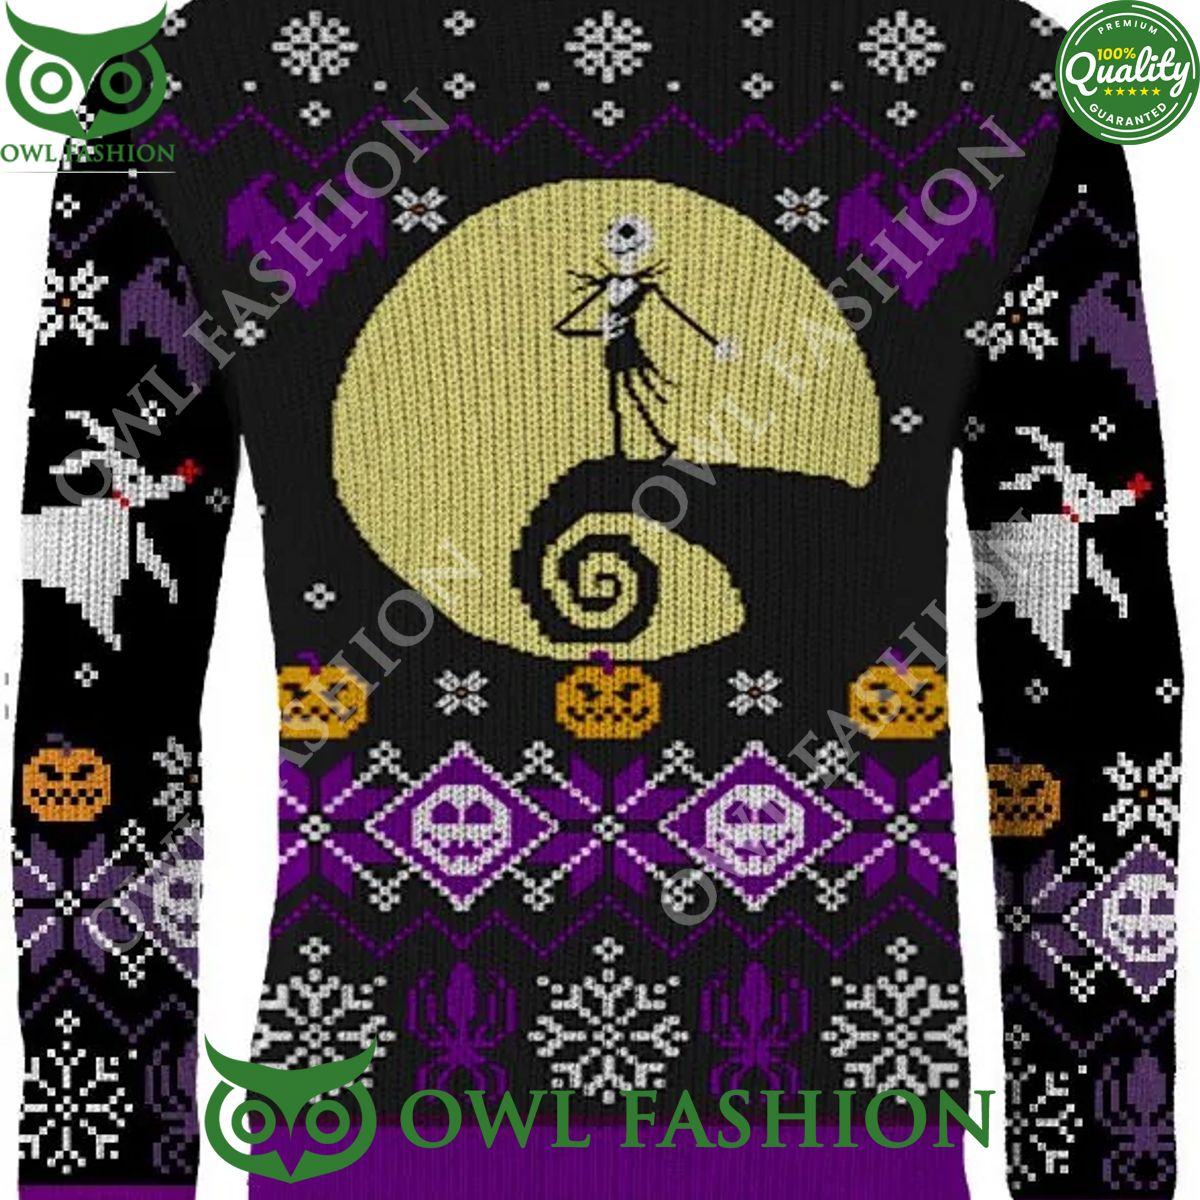 nightmare before christmas whats this christmas jumper 1 4fDeB.jpg